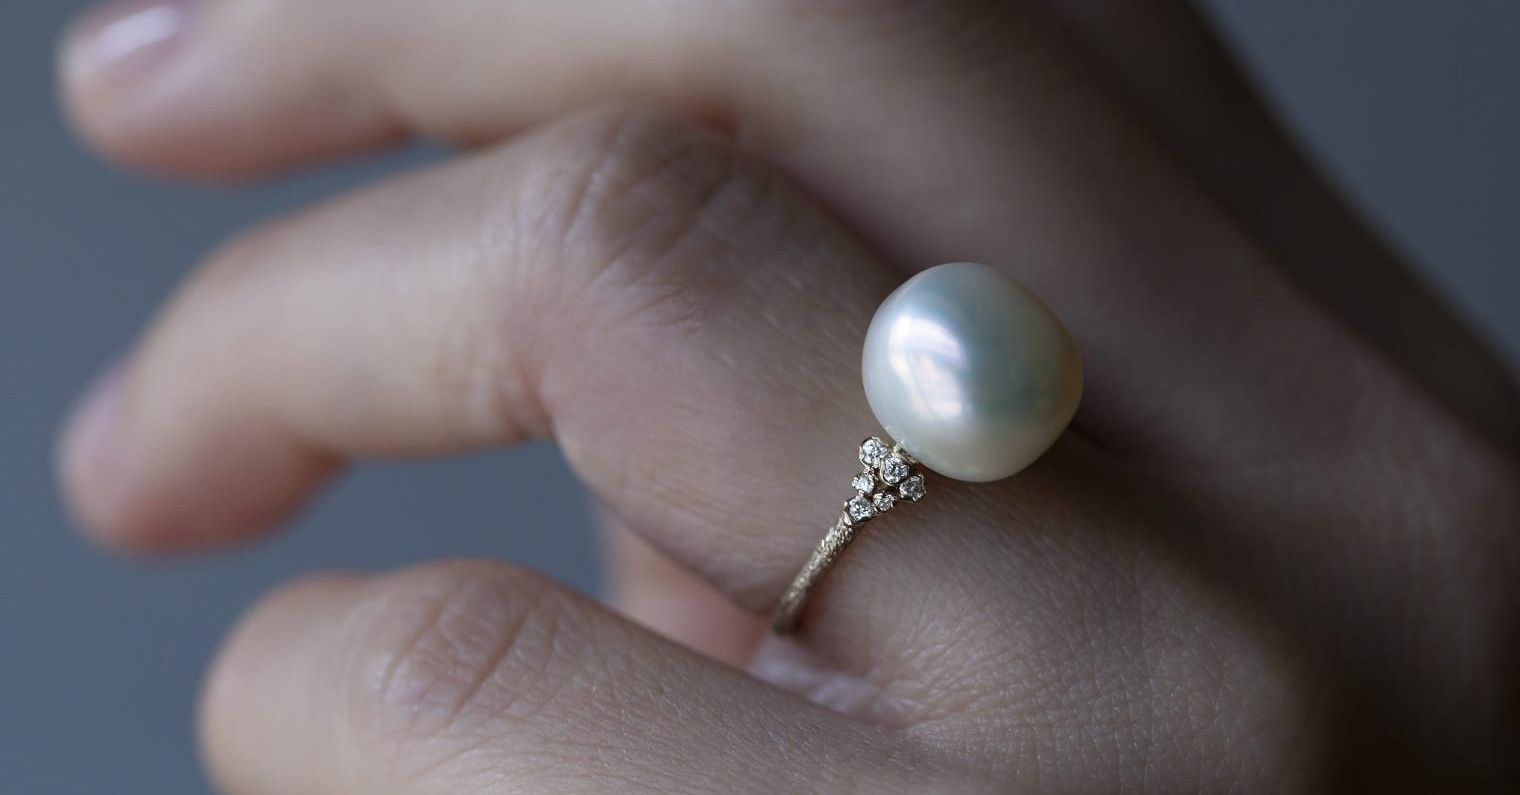 Pearl and diamond ring in white gold | KLENOTA